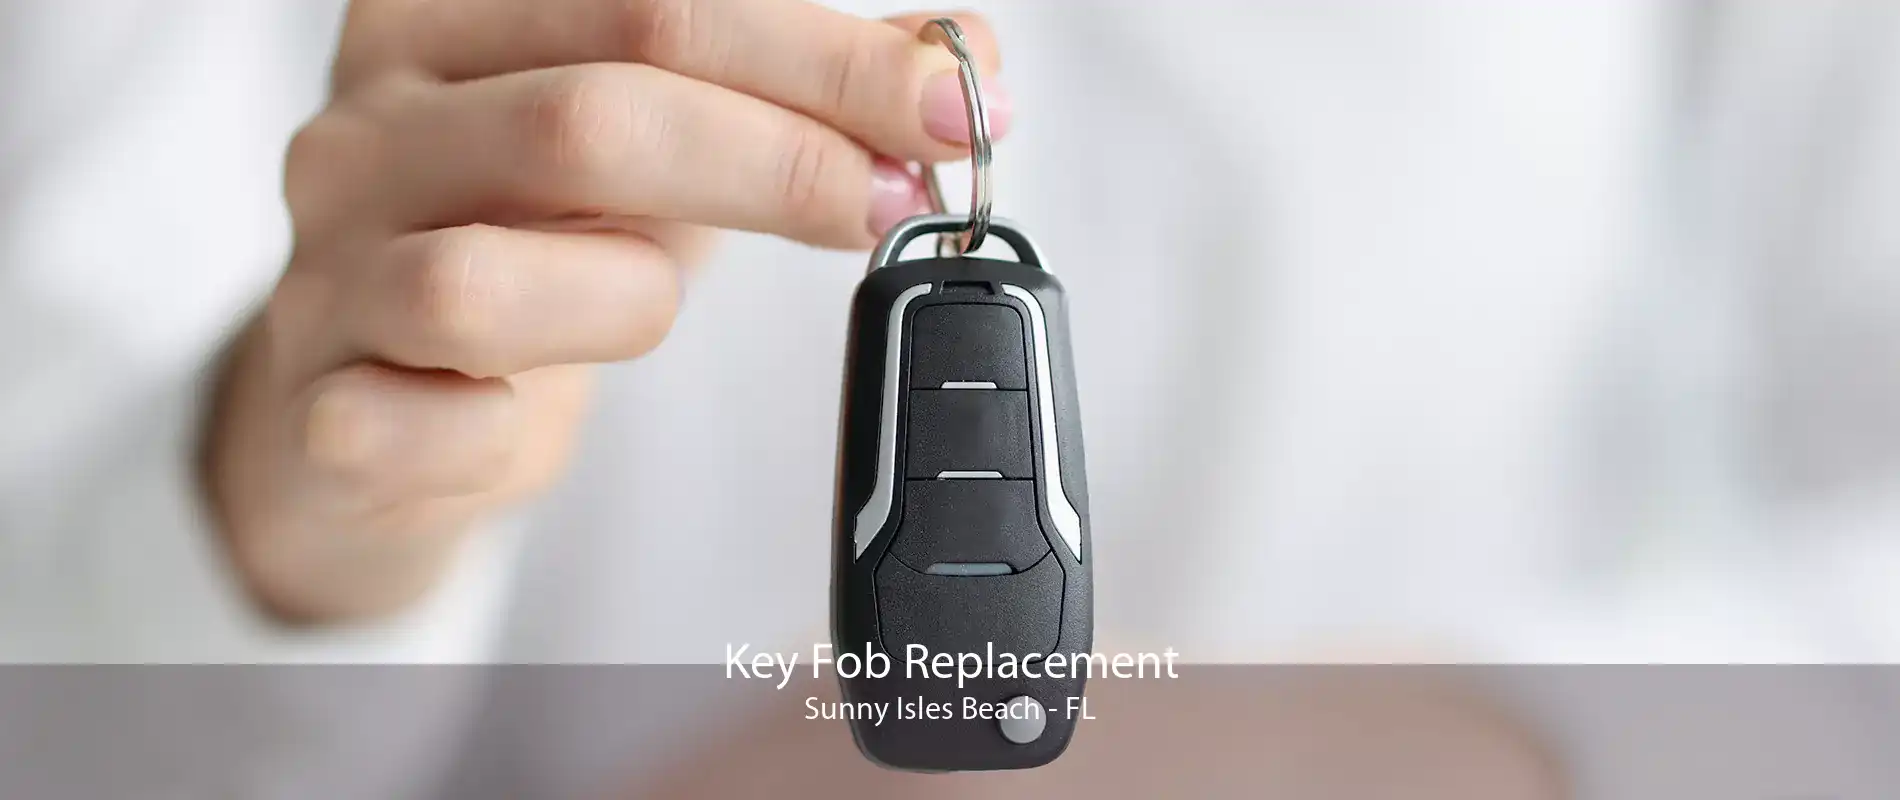 Key Fob Replacement Sunny Isles Beach - FL